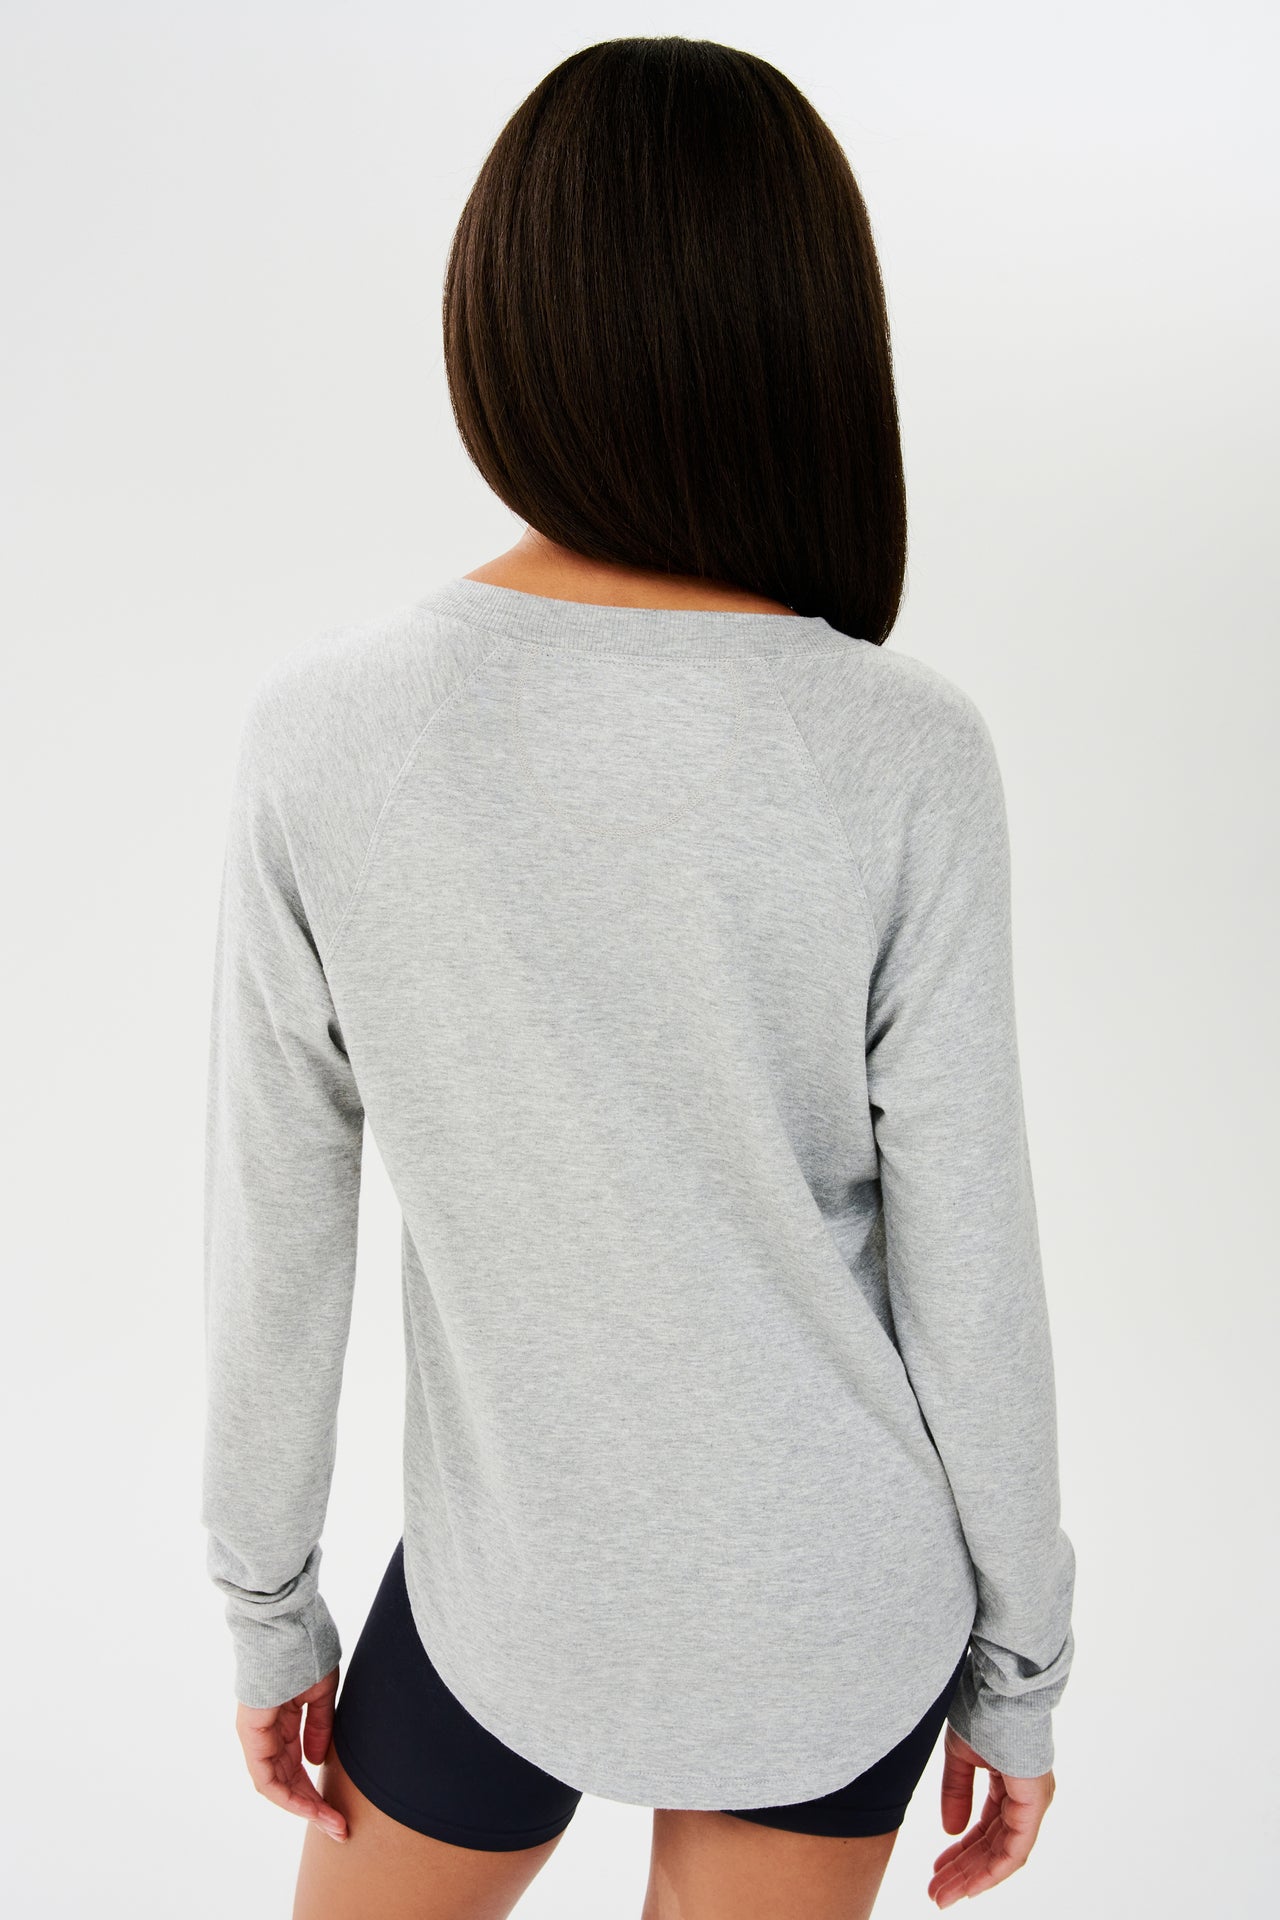 Back side shot of woman with dark straight hair, wearing grey sweatshirt with black shorts